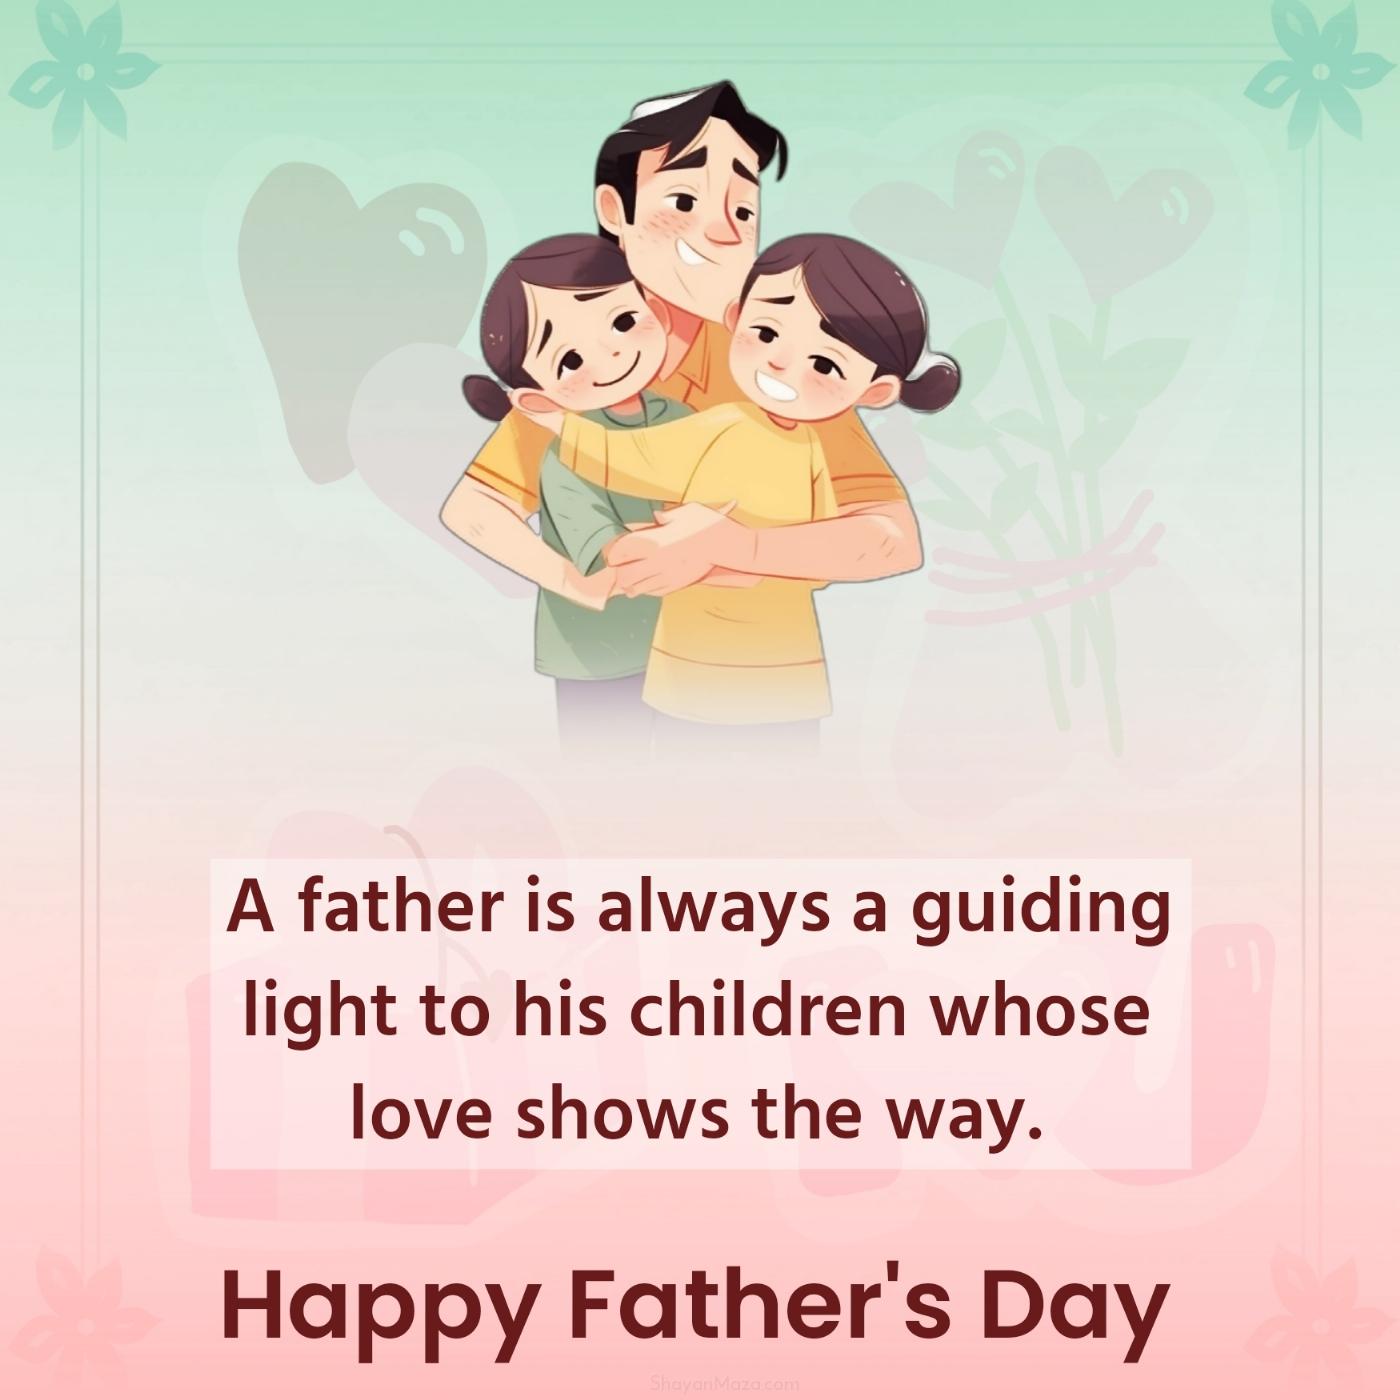 A father is always a guiding light to his children